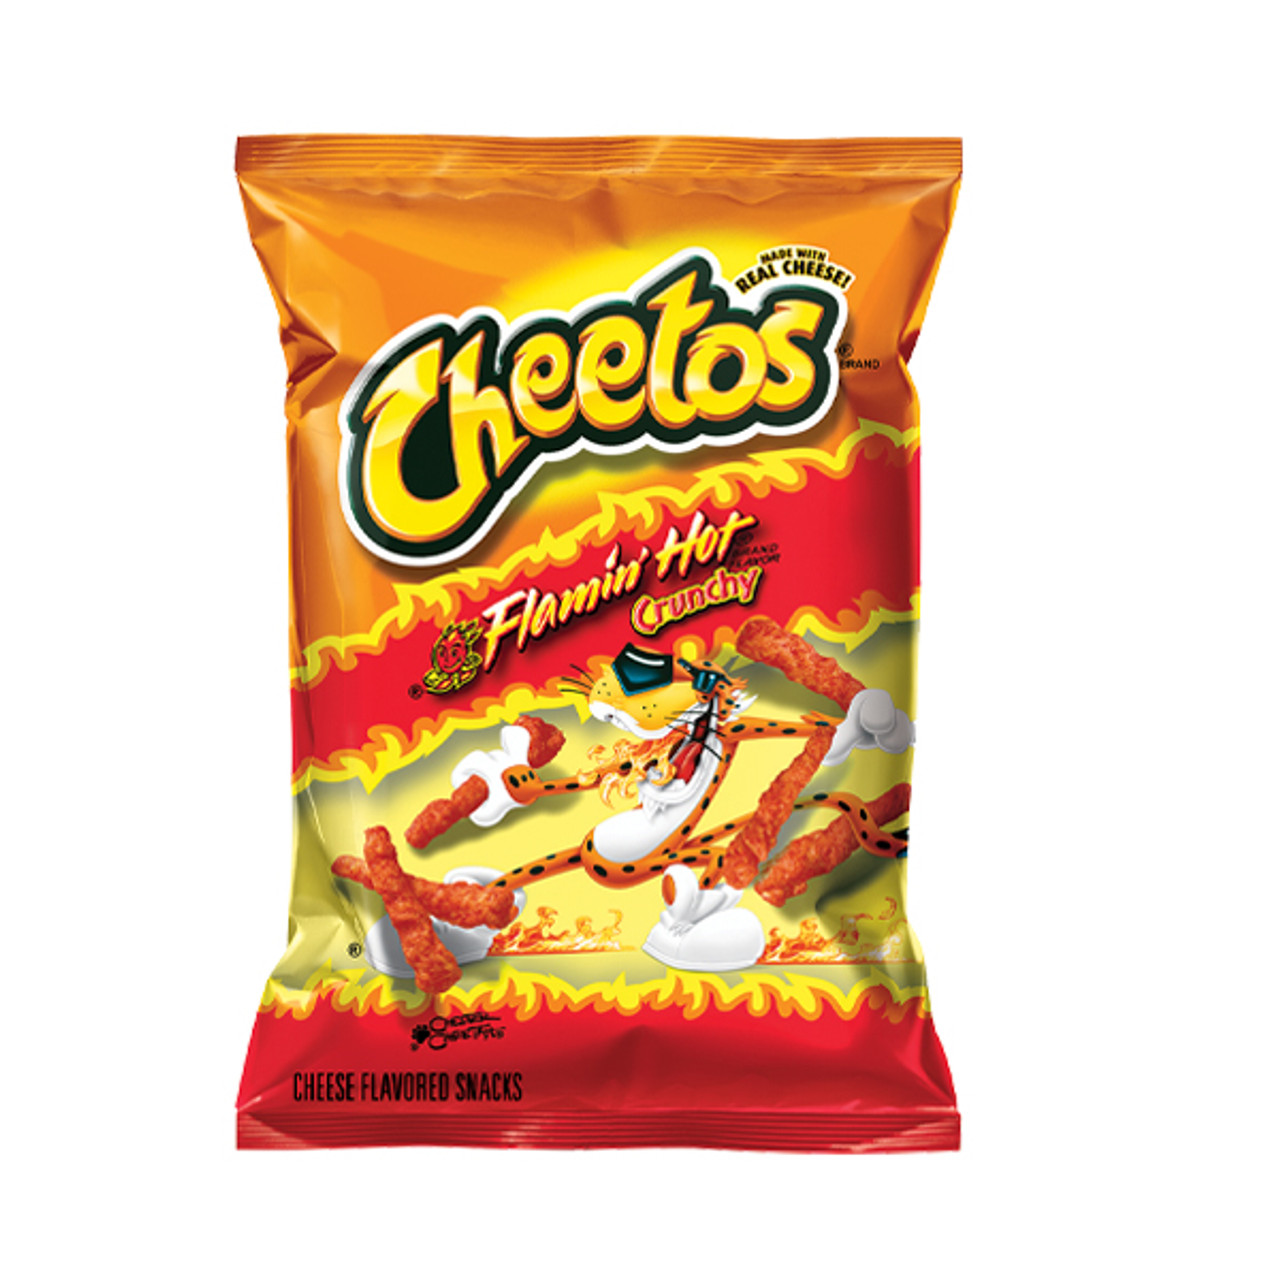 Cheetos Flamin Hot Crunchy Cheese Flavored Snacks 2 Ounce Bags 12ct Box 